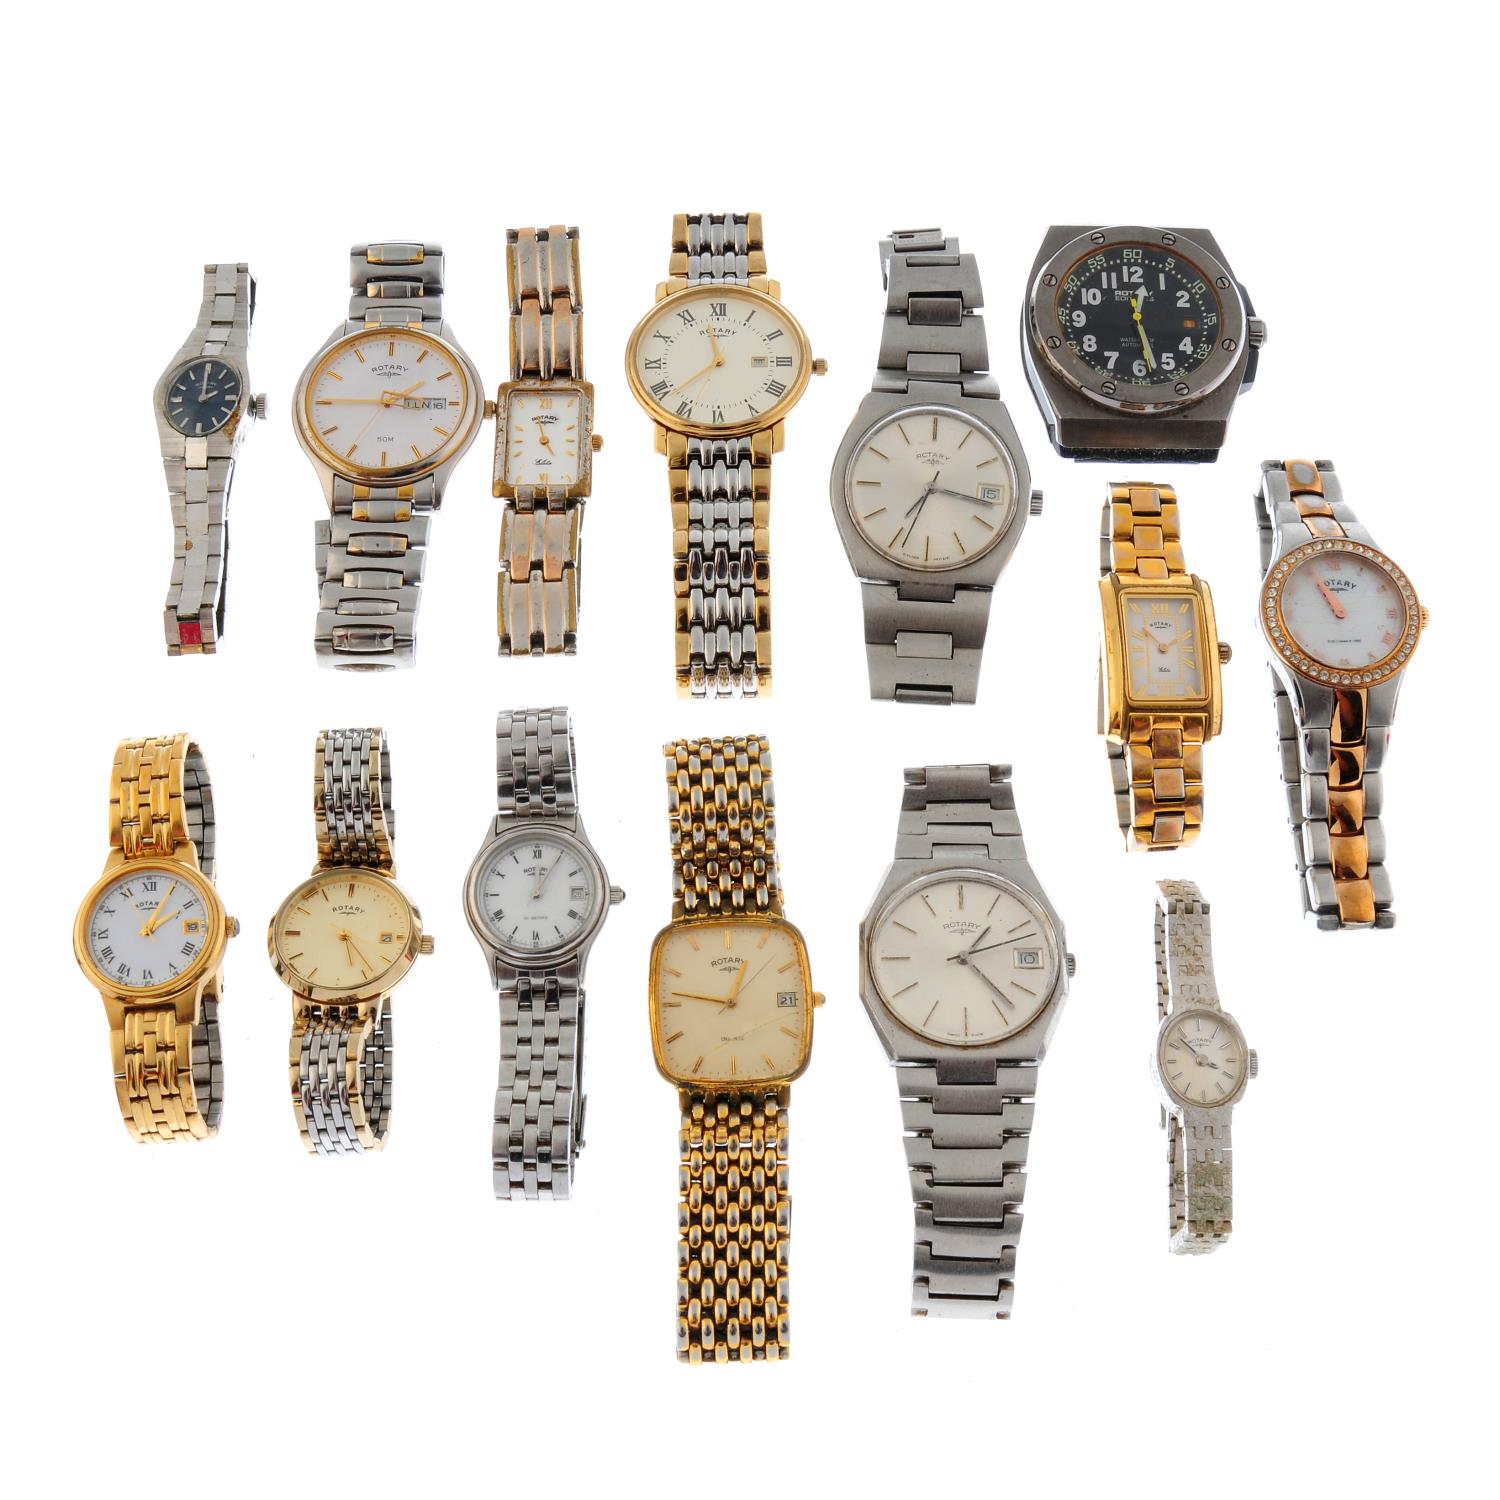 A bag of assorted Rotary watches. - Image 2 of 5